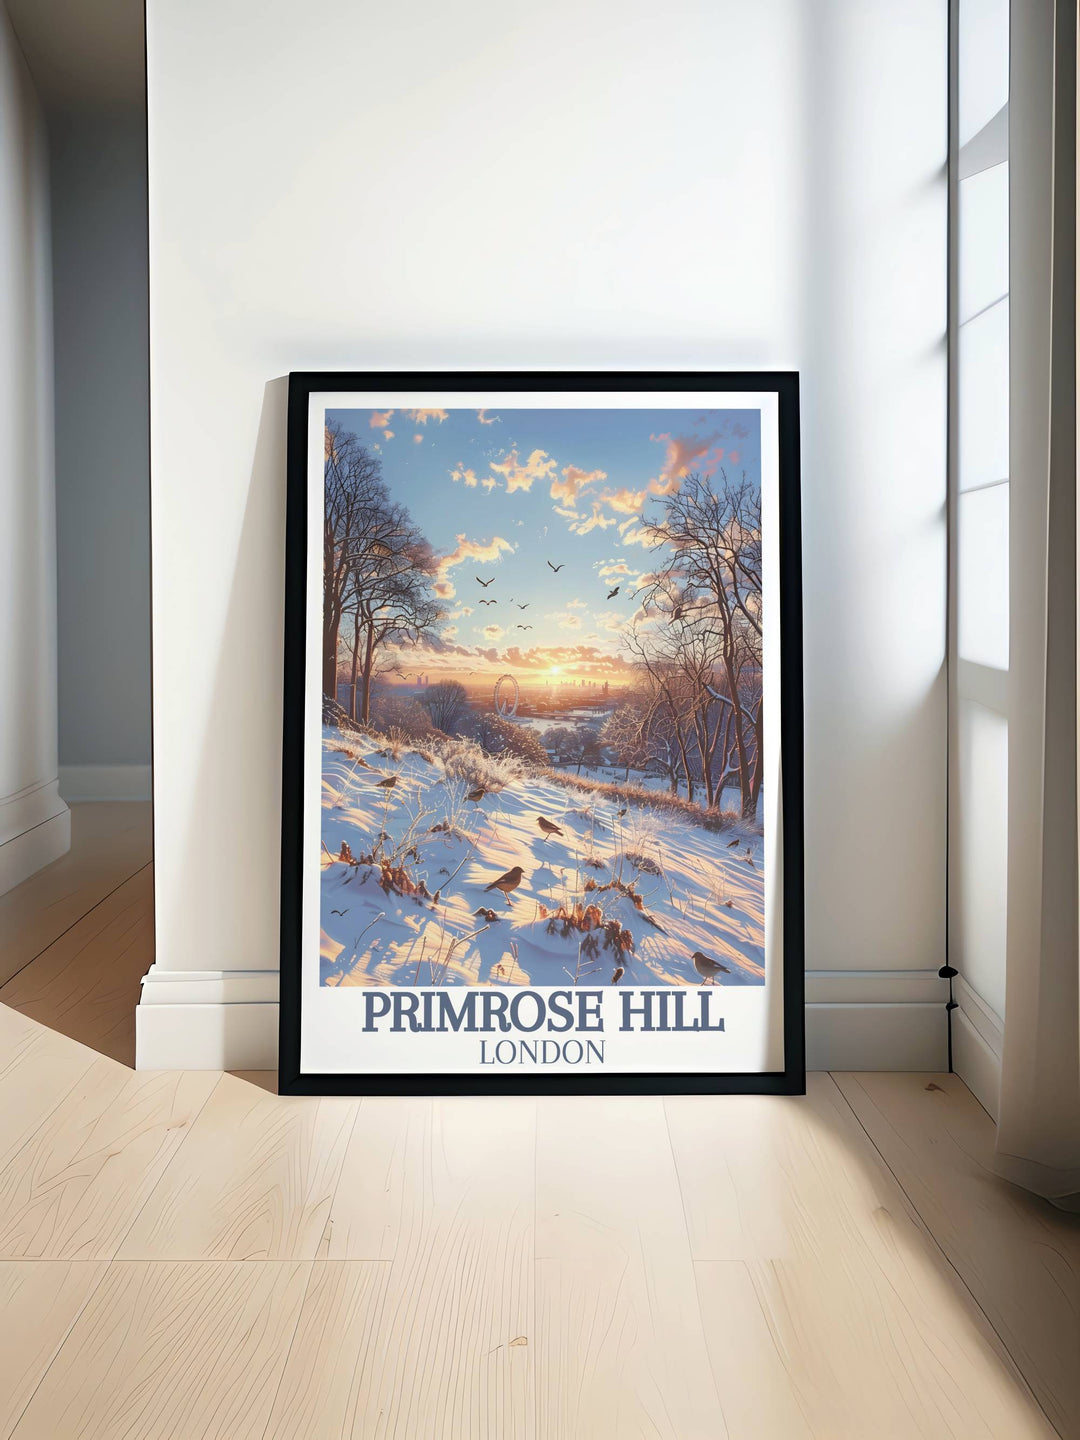 Primrose Hill Gallery Wall Art capturing the serene beauty of Londons skyline, perfect for adding a touch of tranquility to your home decor.